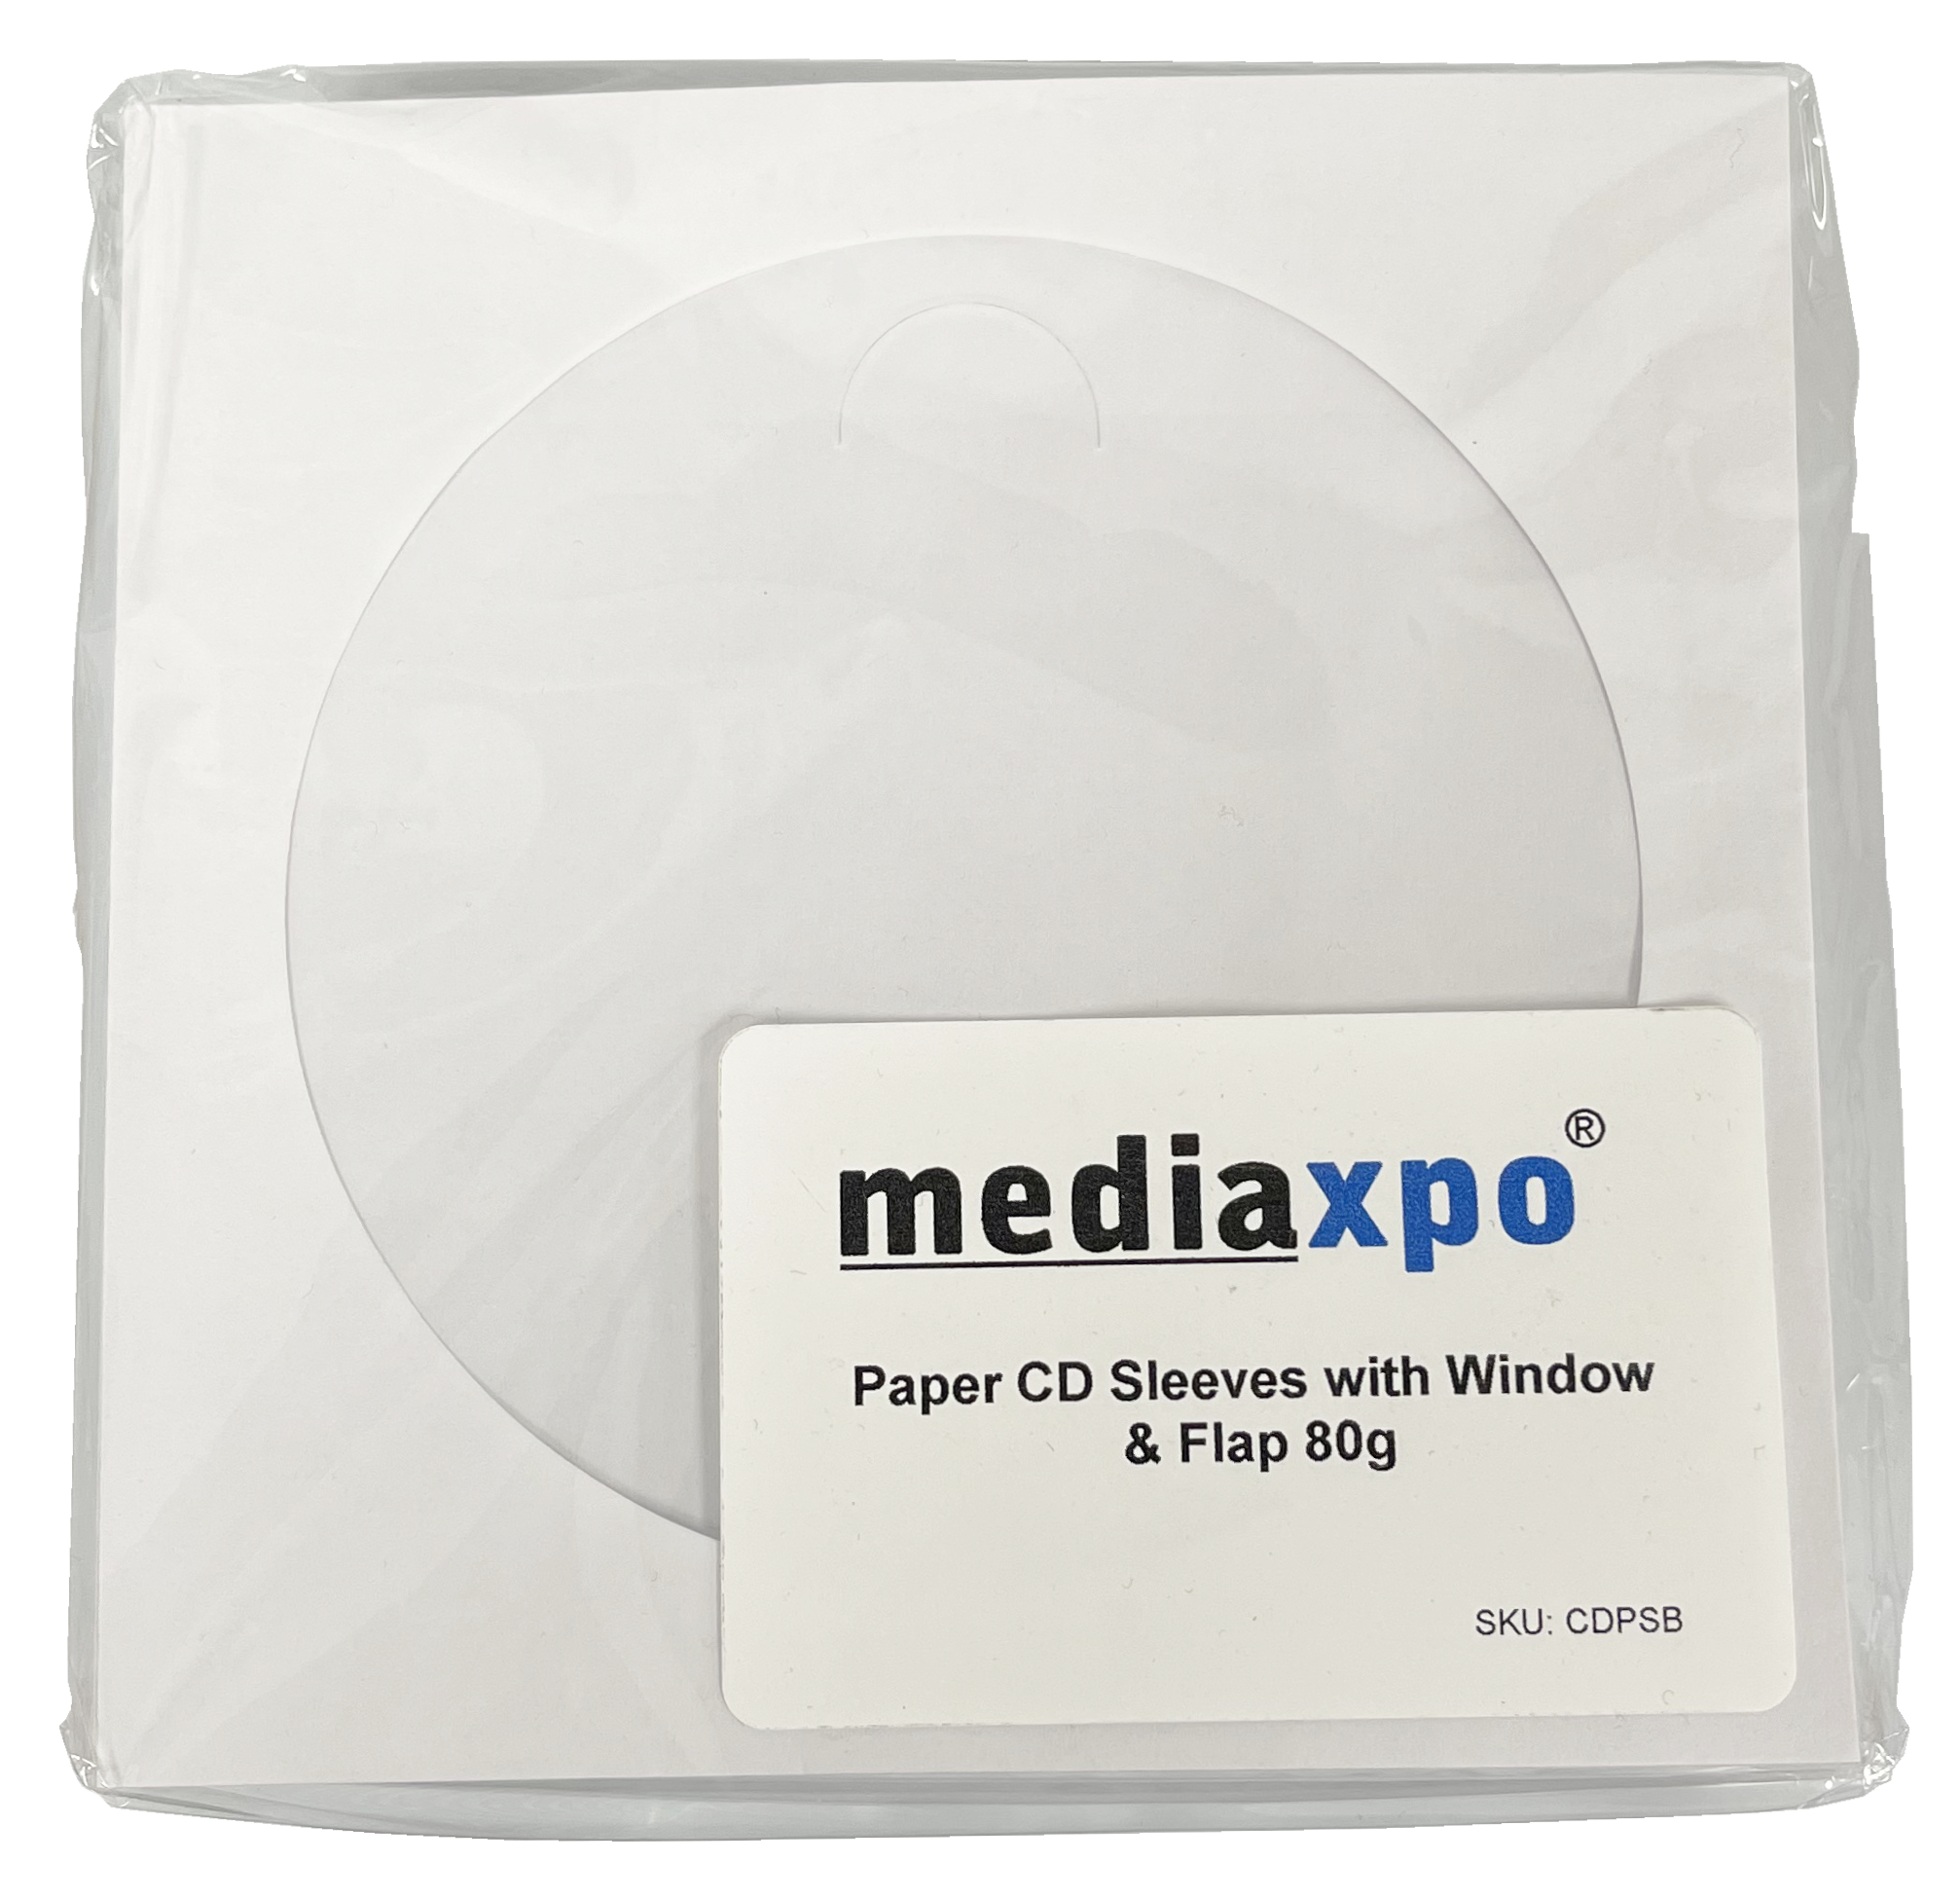 2000 Paper CD Sleeves with Window & Flap 80g